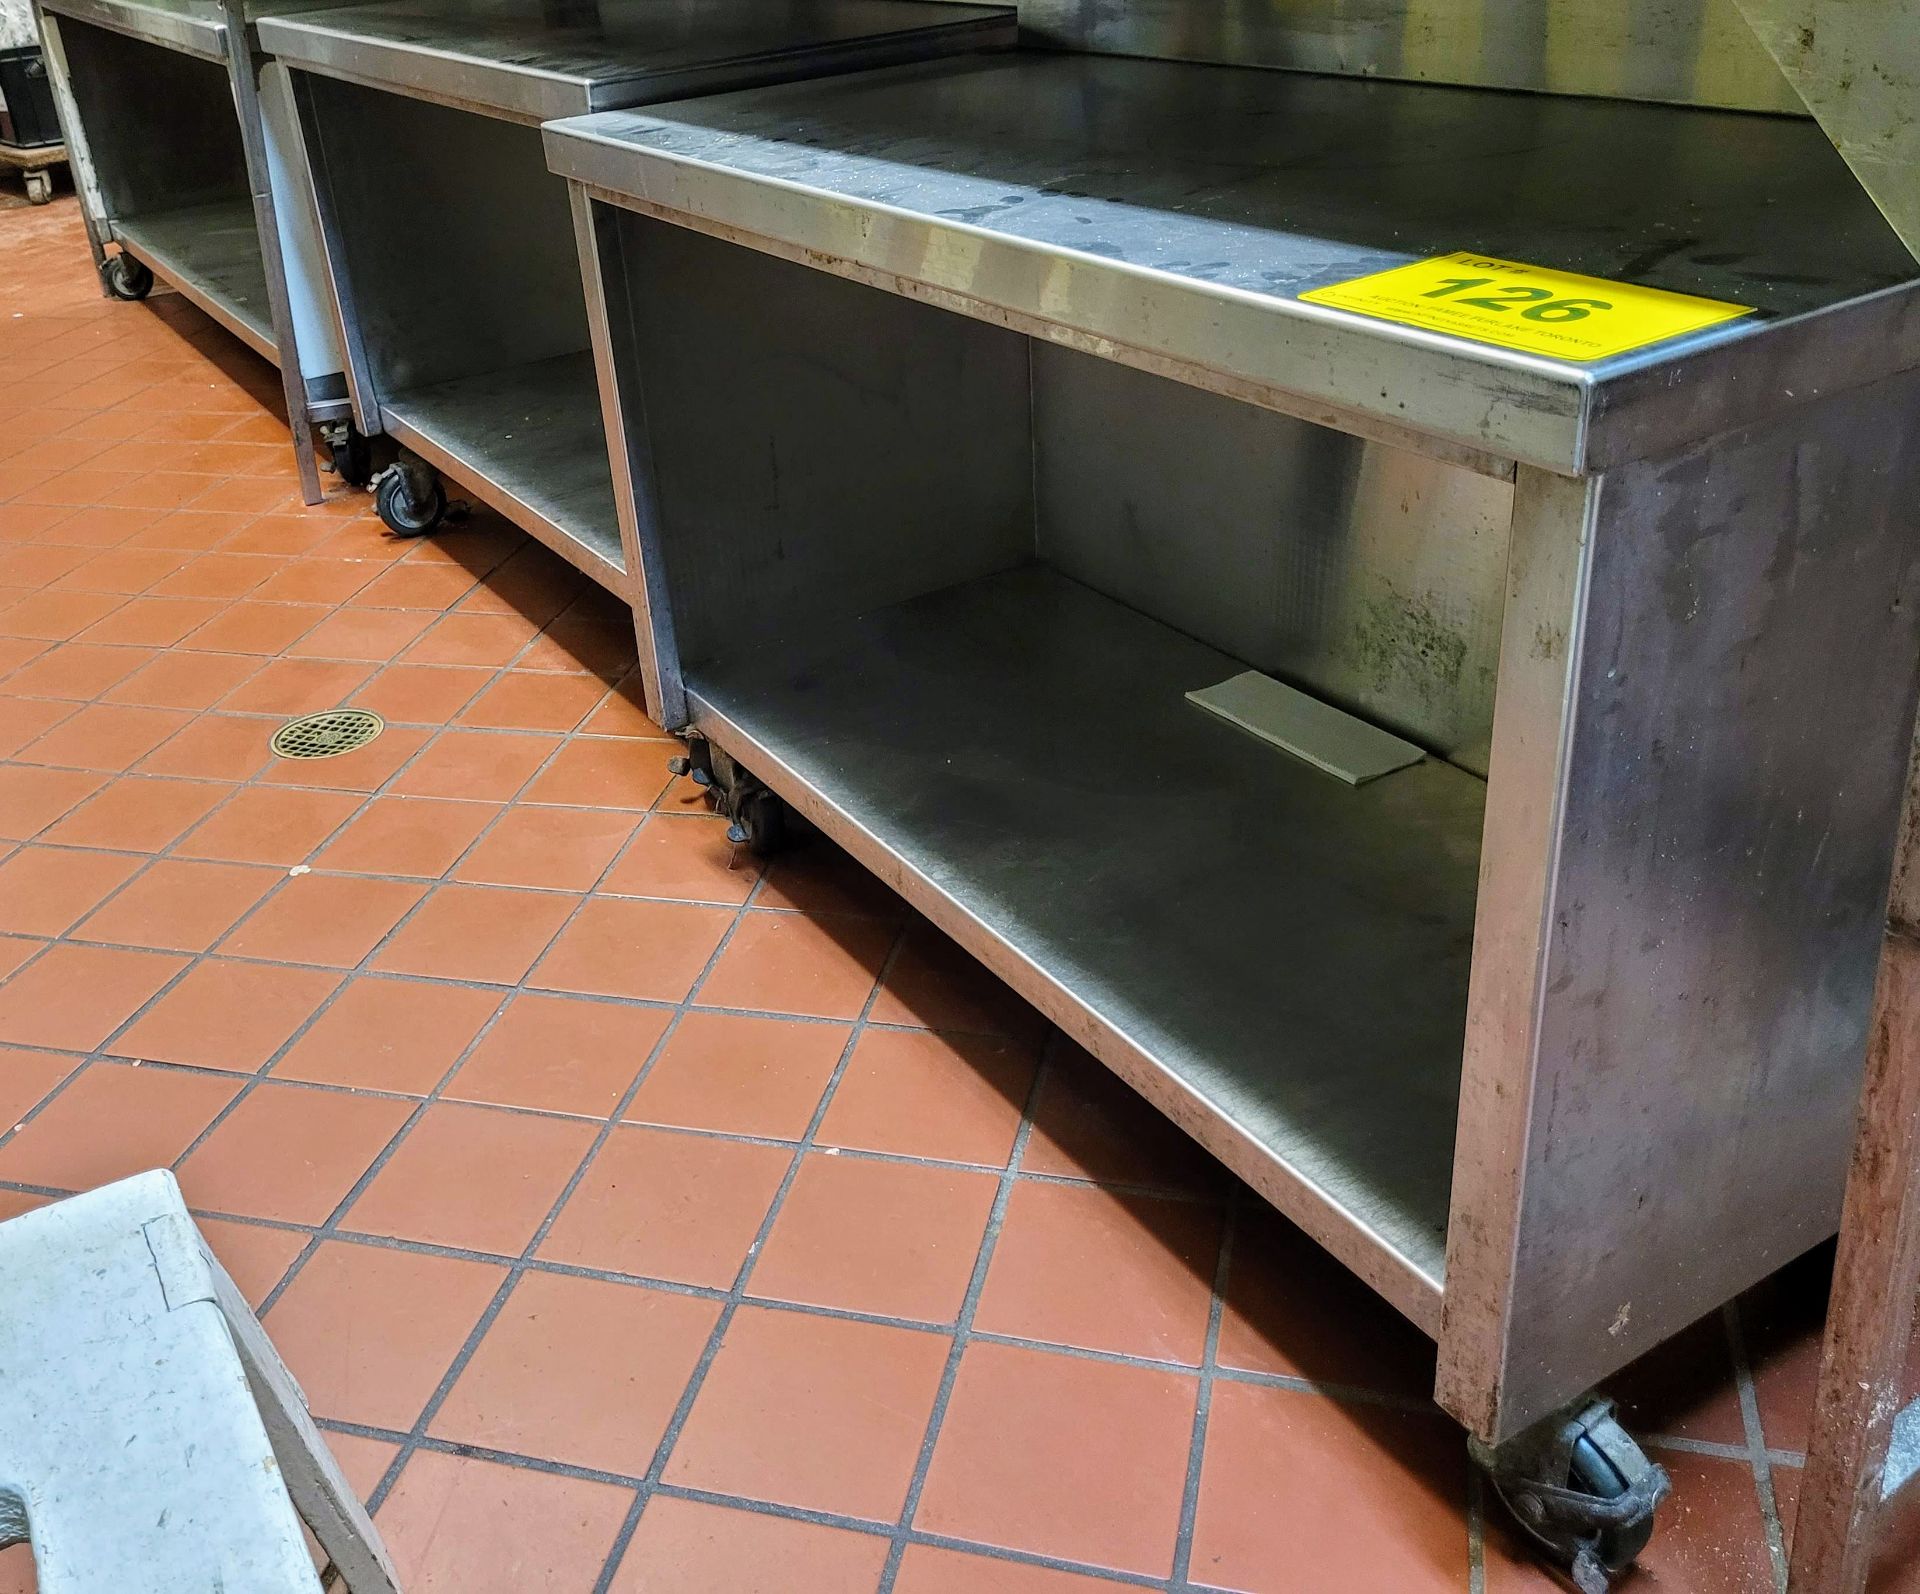 LOT - (3) PORTABLE STAINLESS STEEL UNITS - (42"L X 19"W X 32"H) - Image 2 of 3